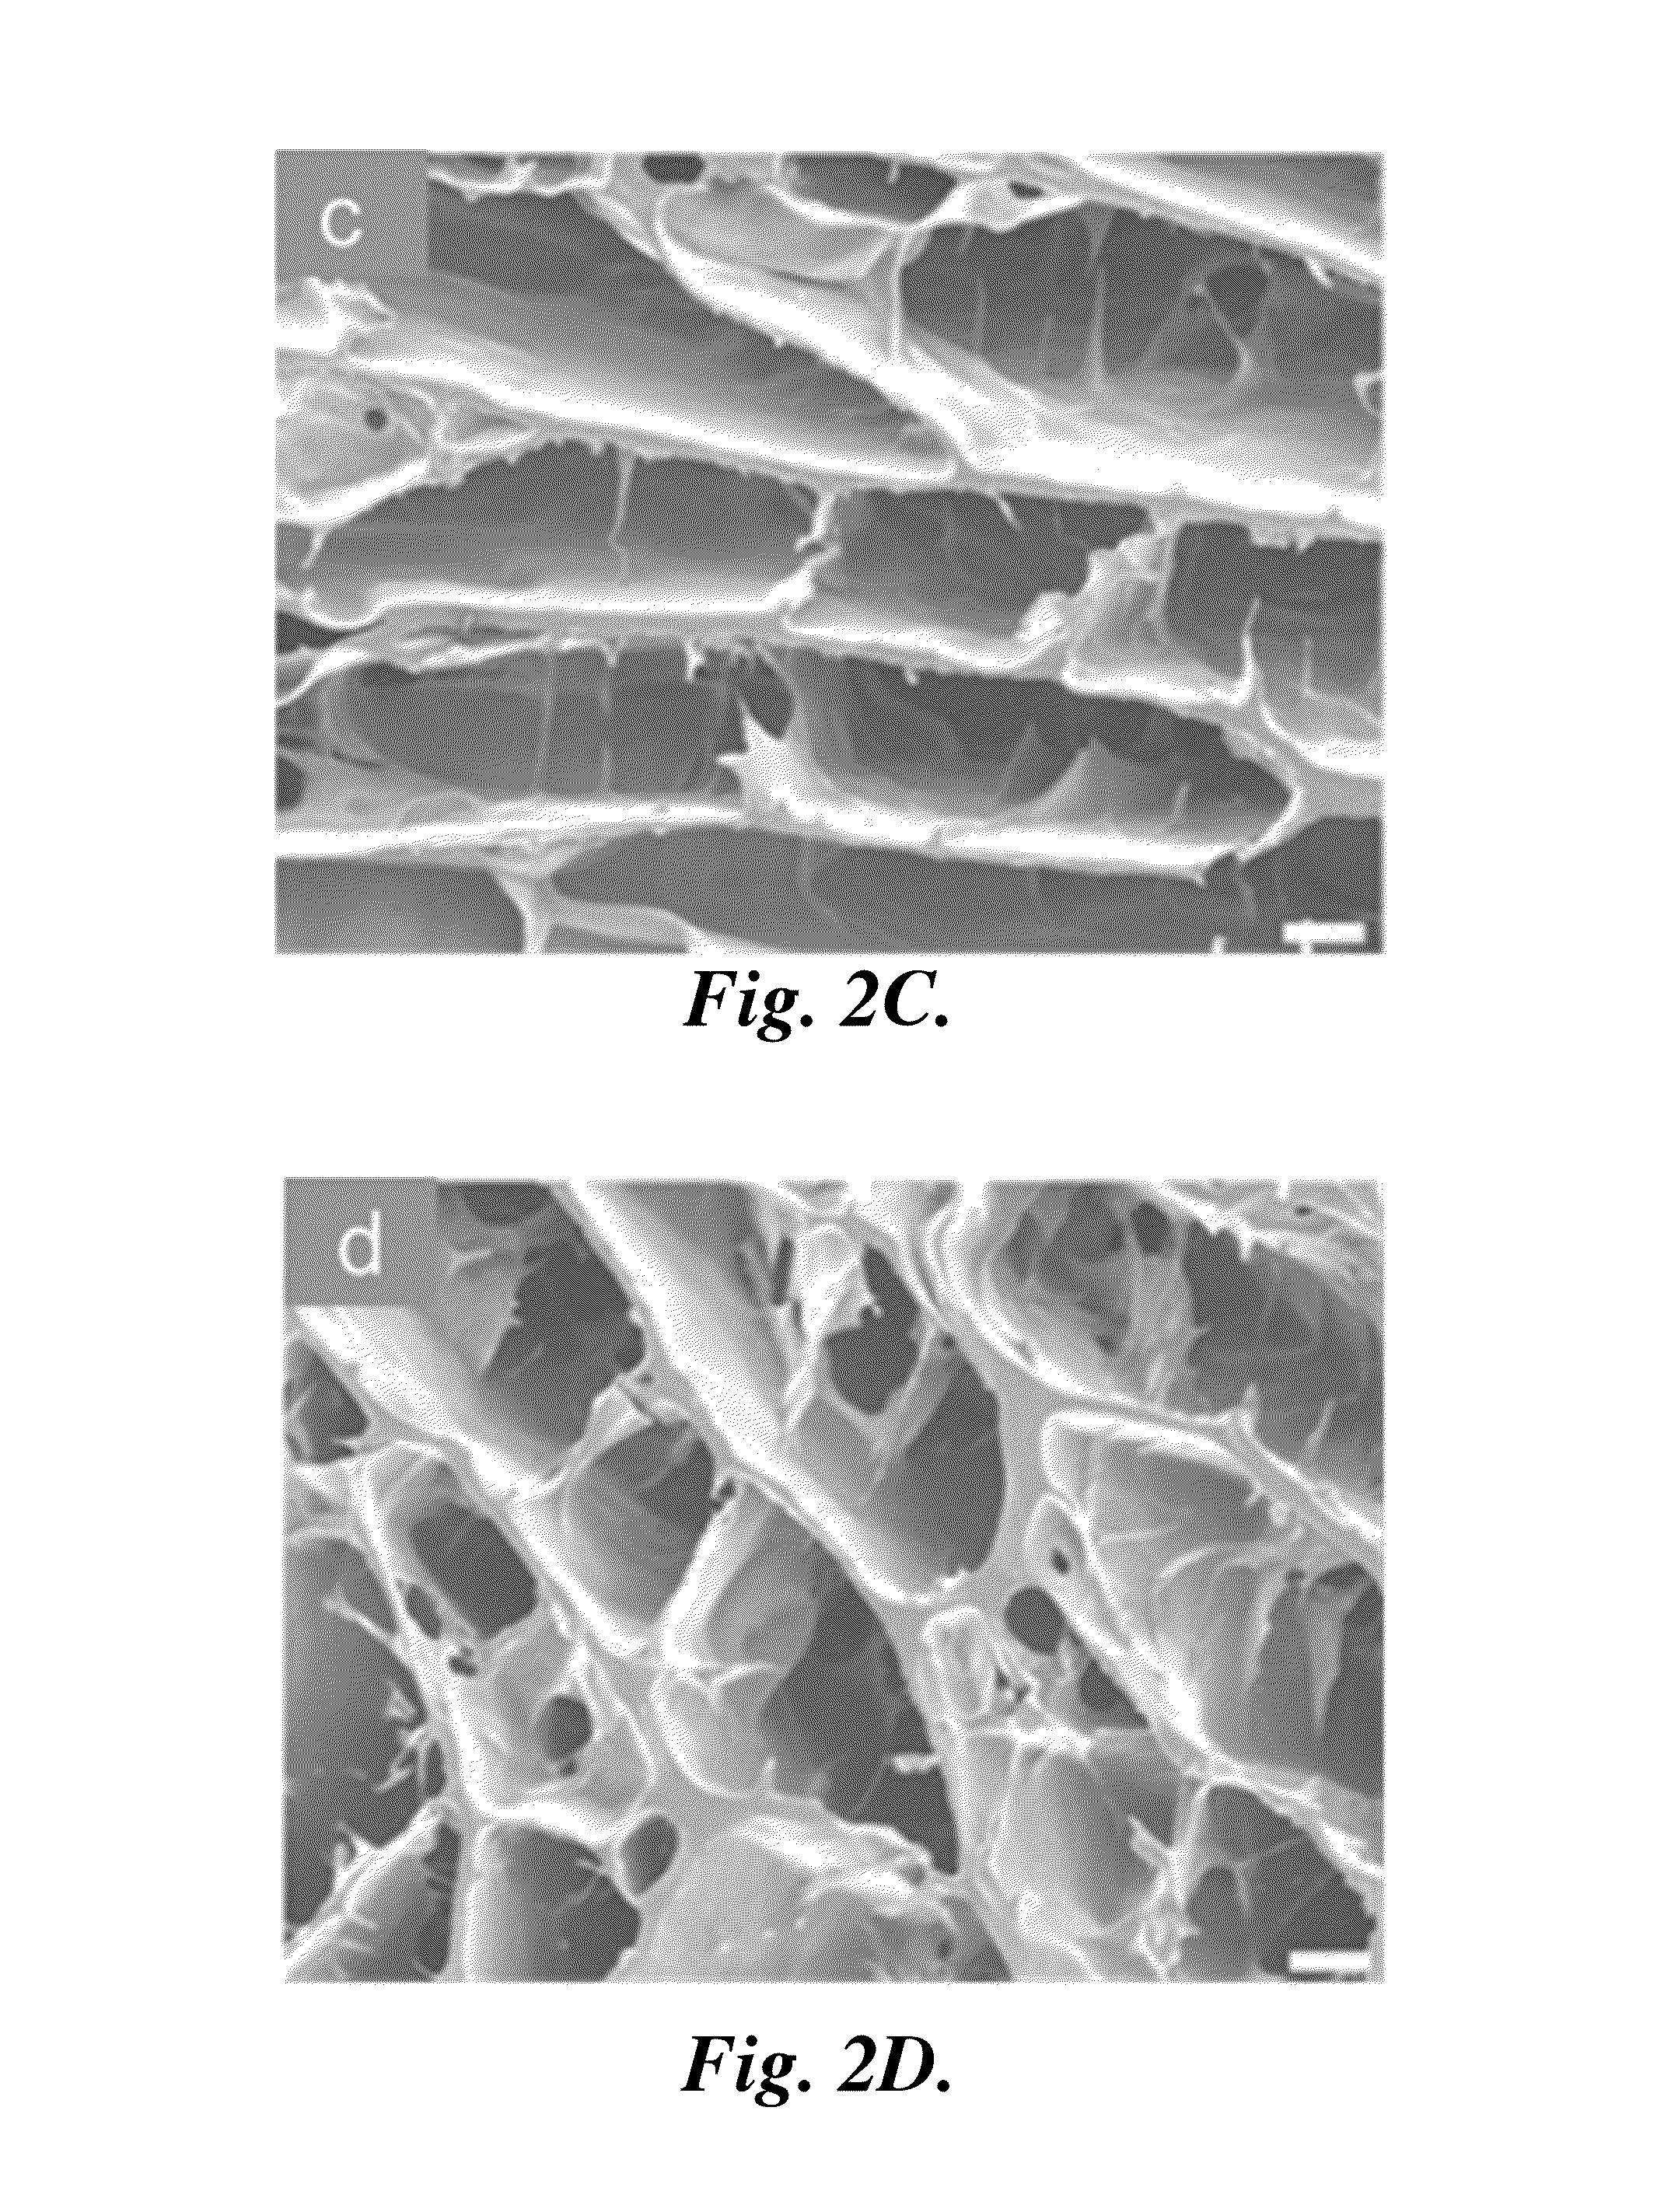 Porous chitosan scaffolds and related methods